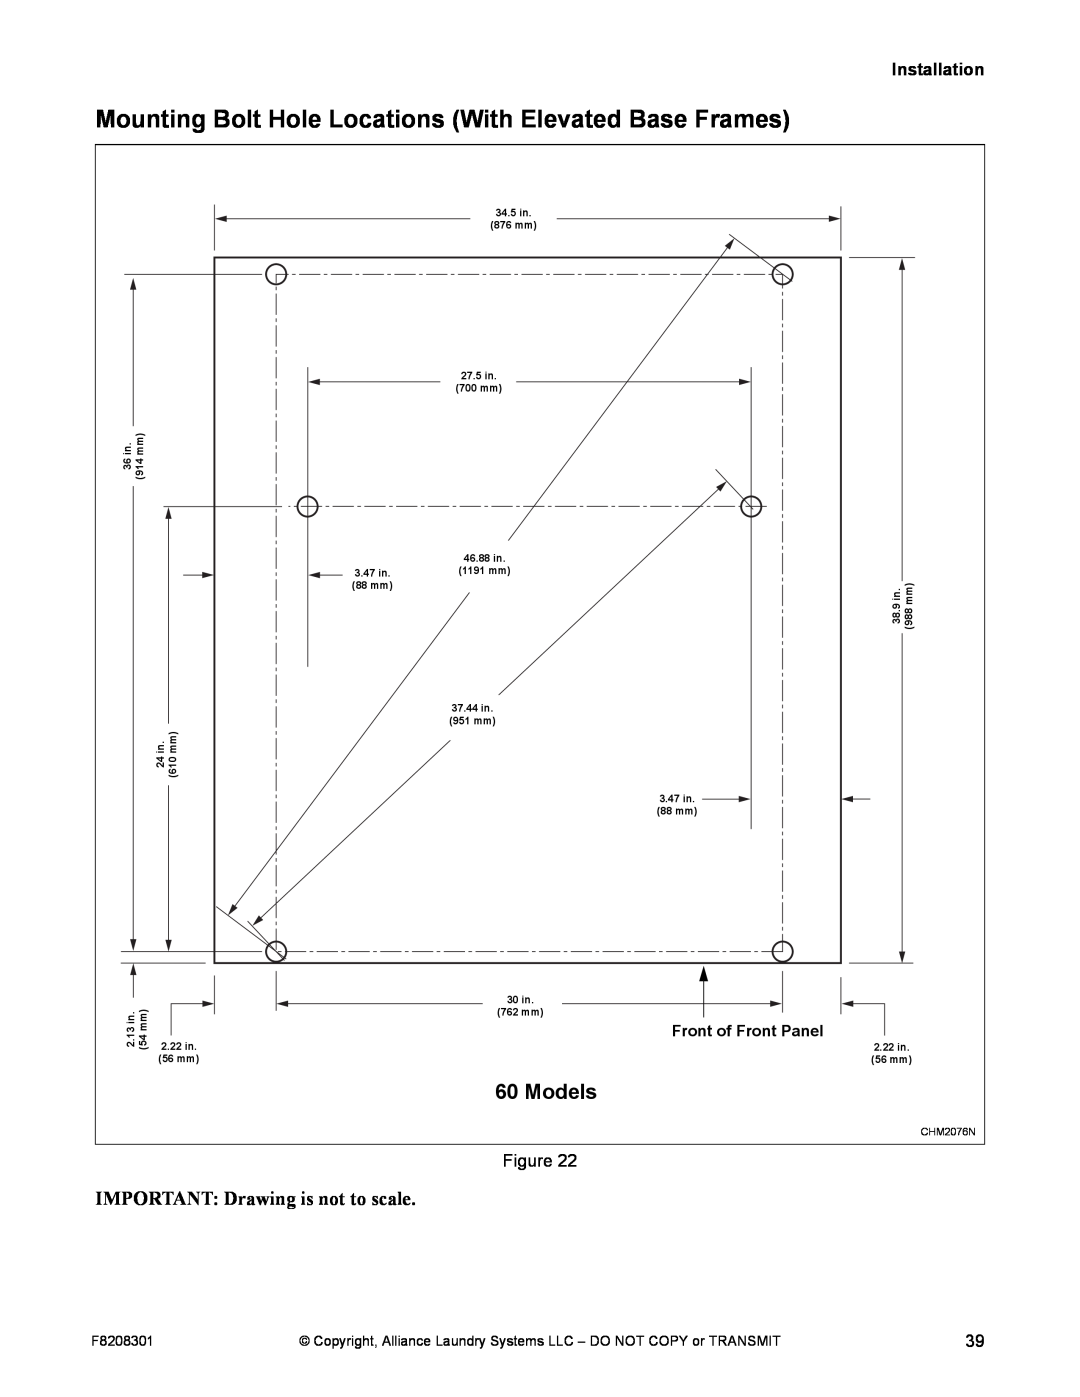 Alliance Laundry Systems CHM1772C Mounting Bolt Hole Locations With Elevated Base Frames, Models, Installation, F8208301 